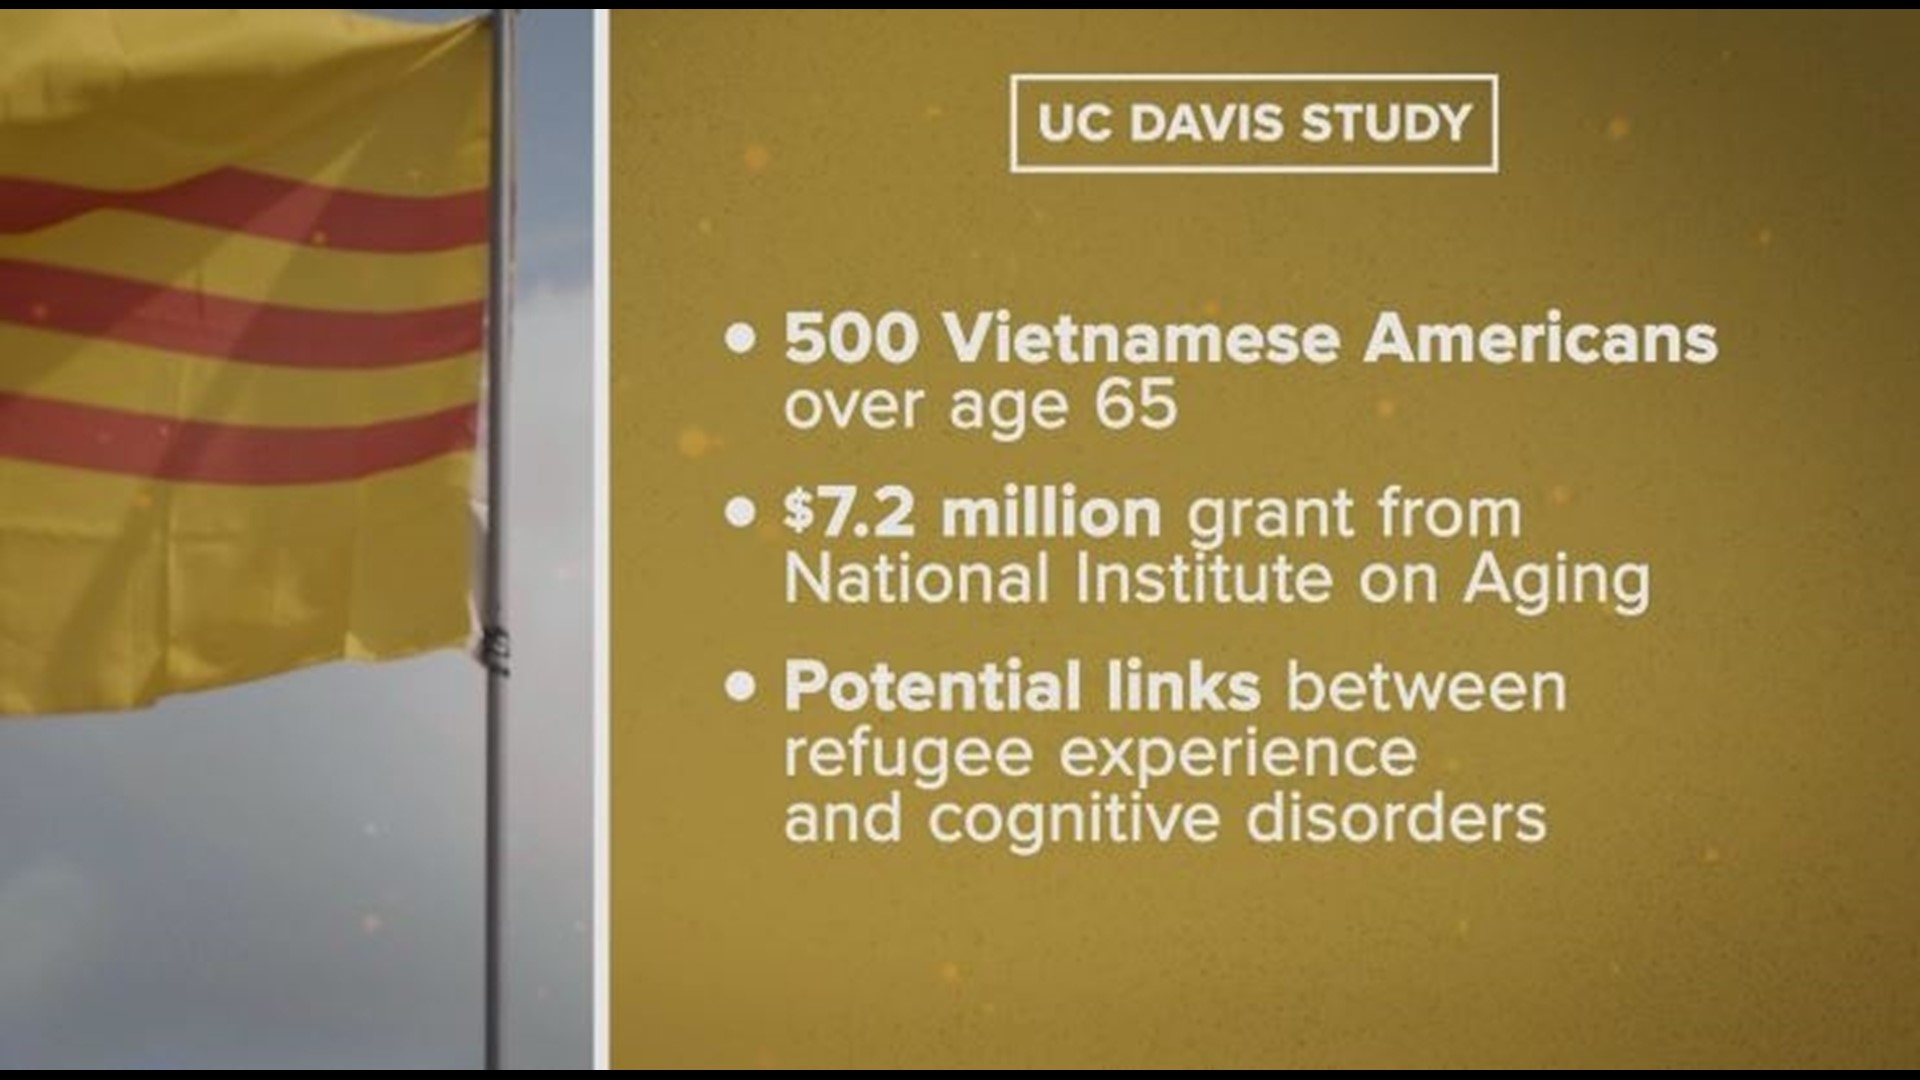 A look at a first-of-its-kind study delving into wartime trauma on Vietnamese Americans. Cognitive health will be tracked for 5 years.